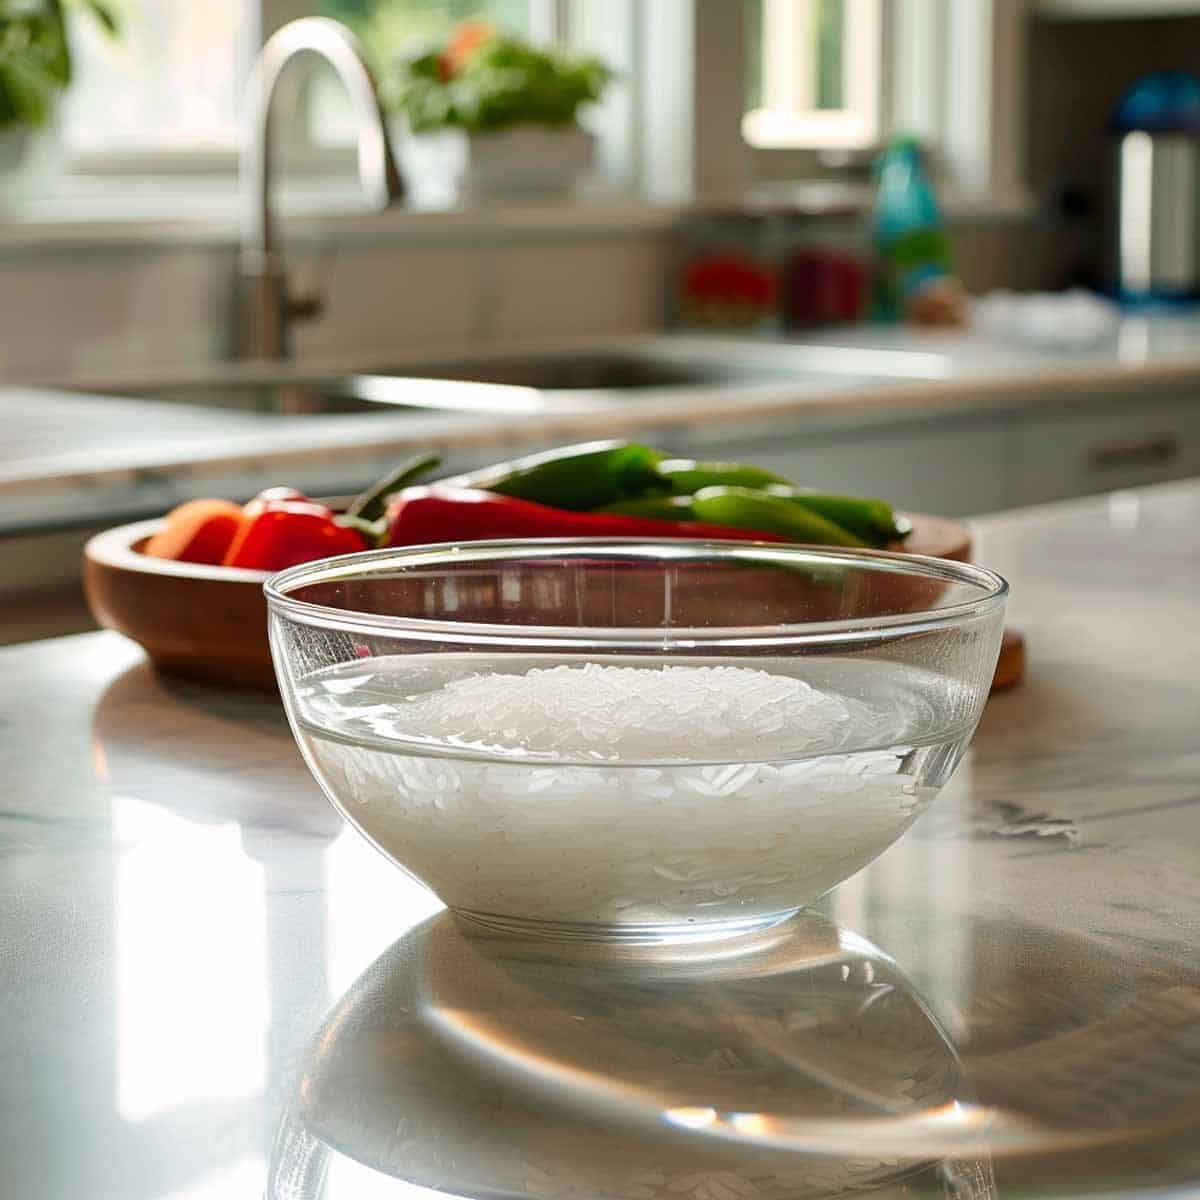 "A bowl of dried rice noodles soaking in clear water, placed on a kitchen counter. The noodles are visibly softening and expanding as they absorb the water, preparing them for cooking